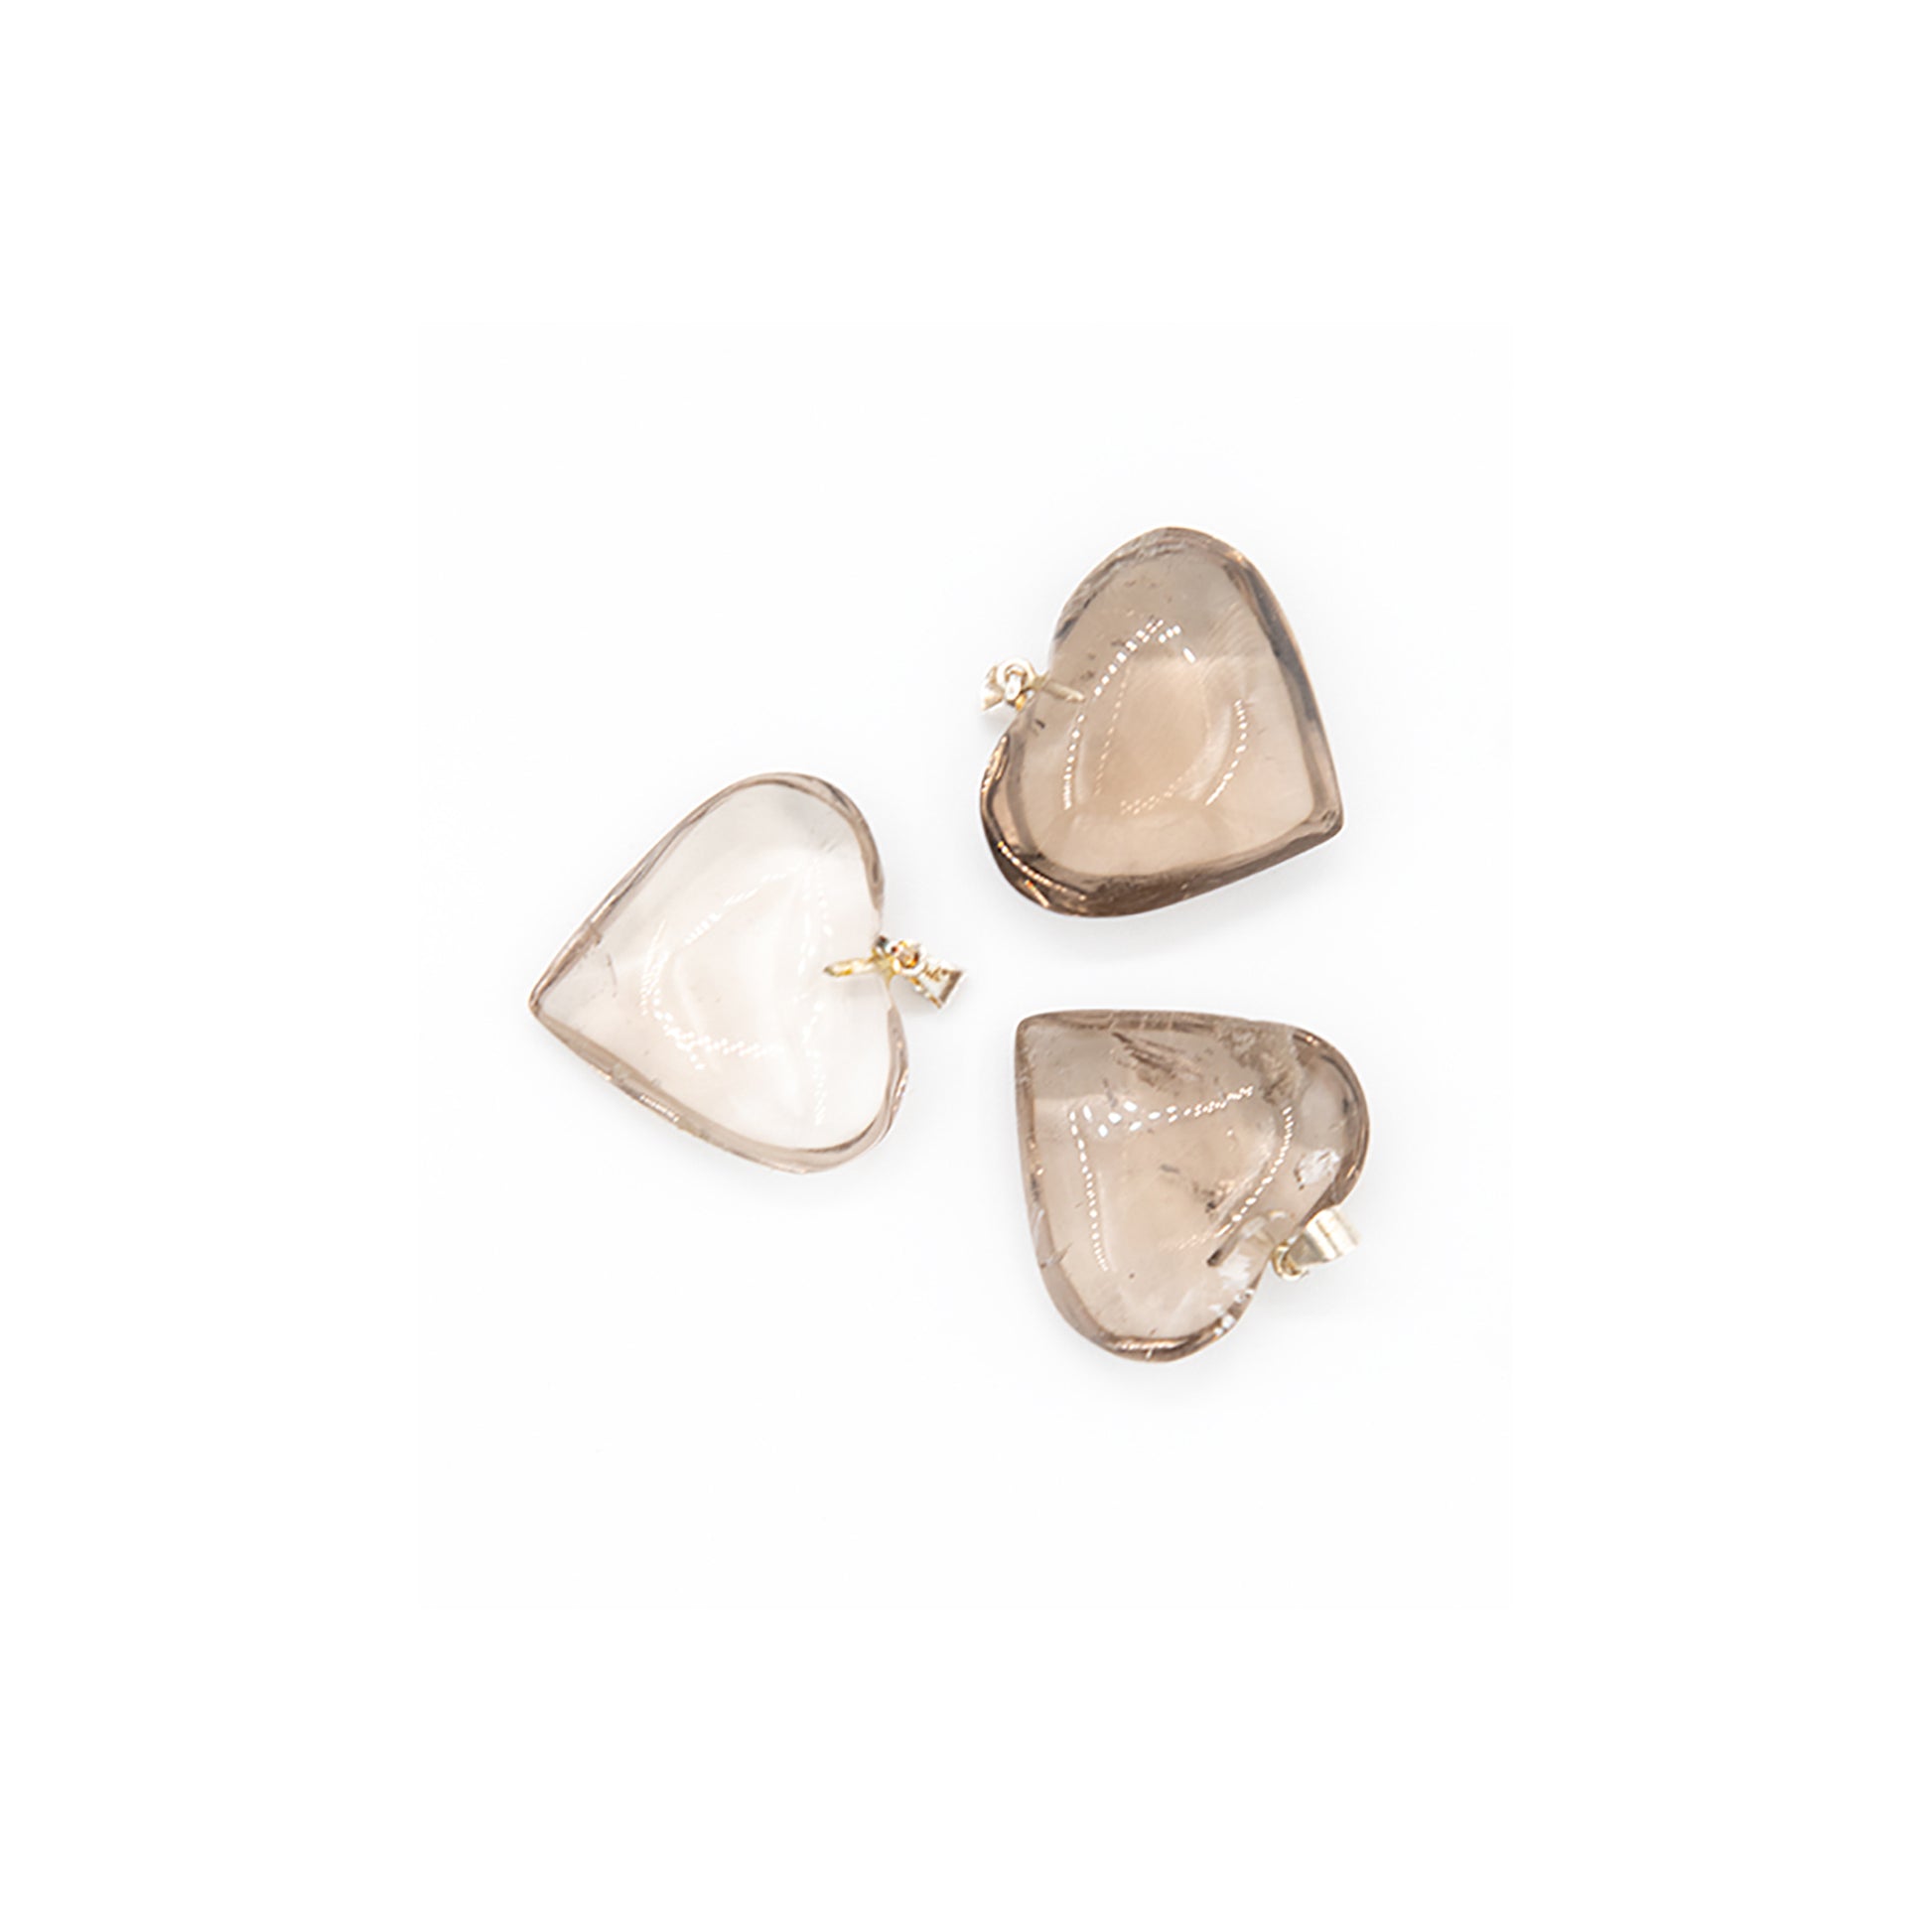 Glowing Smokey Quartz Heart Pendants.  These heart pendants are made in Brazil from fine Smokey Quartz that simply glows.   Totally translucent and smoothly polished these are fun to wear.   They measure a little over an inch.   Smokey quartz is said to be a great stone for grounding yourself.